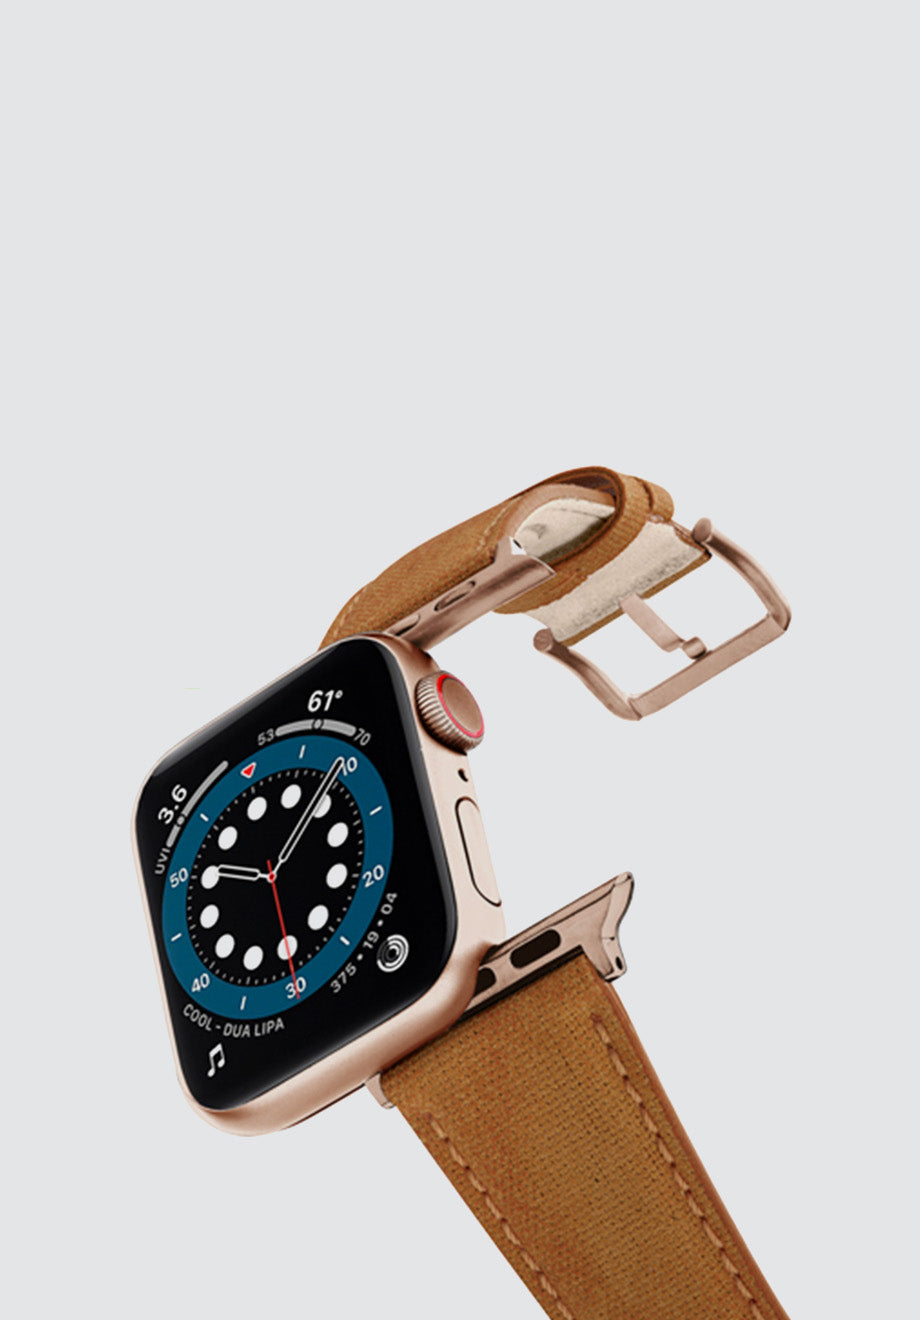 REcycled Toffee Apple Watch Band